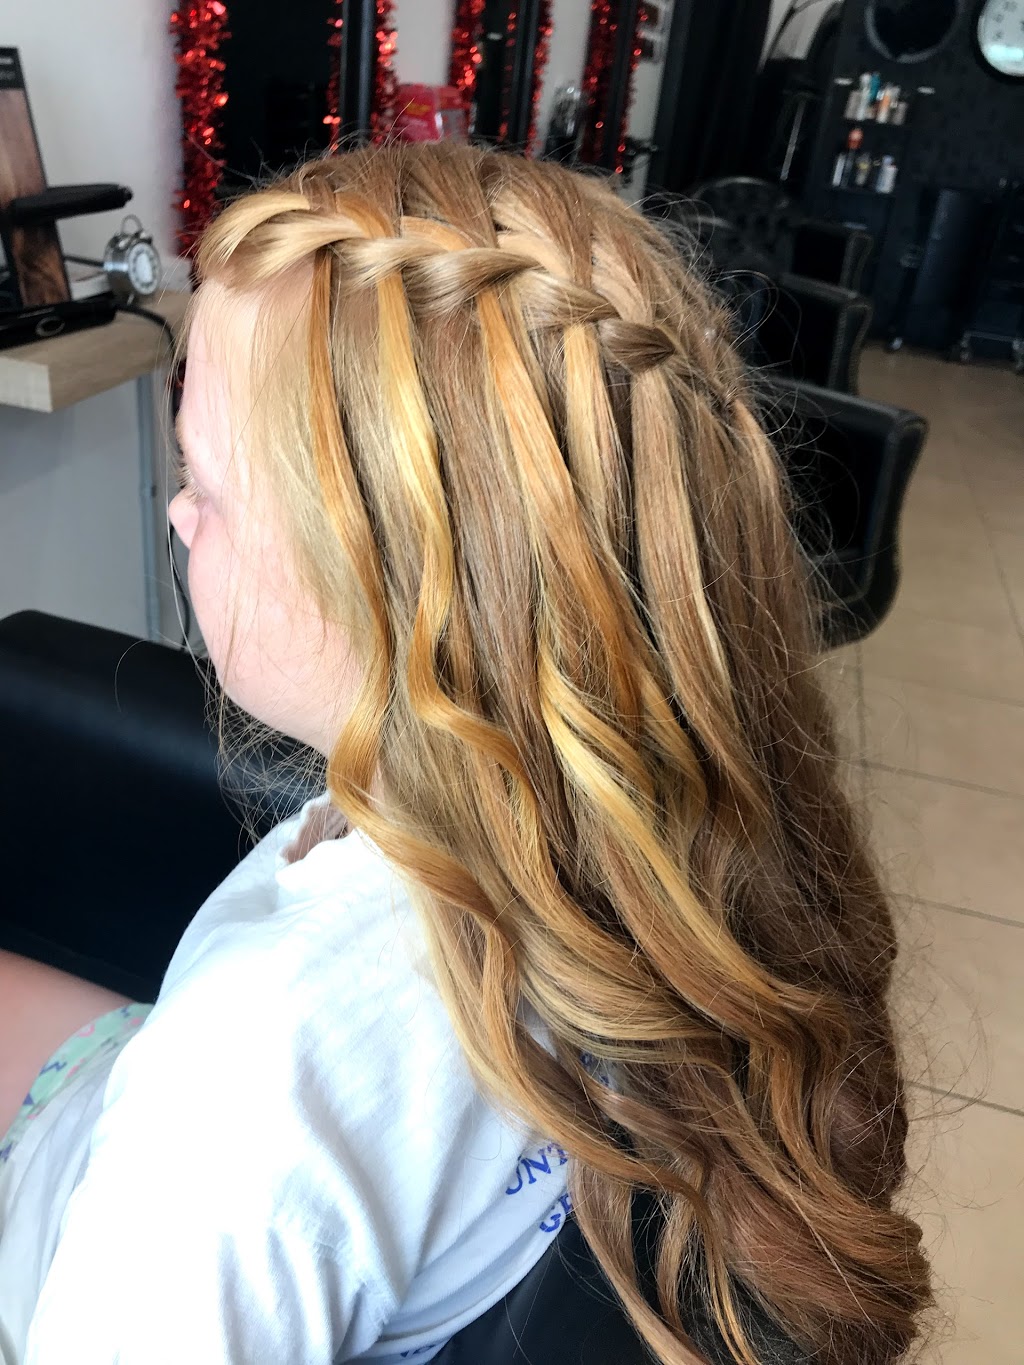 THIS IS HAIR by kylie louise | 3/2 Rooty Hill Rd S, Rooty Hill NSW 2766, Australia | Phone: (02) 9832 3334